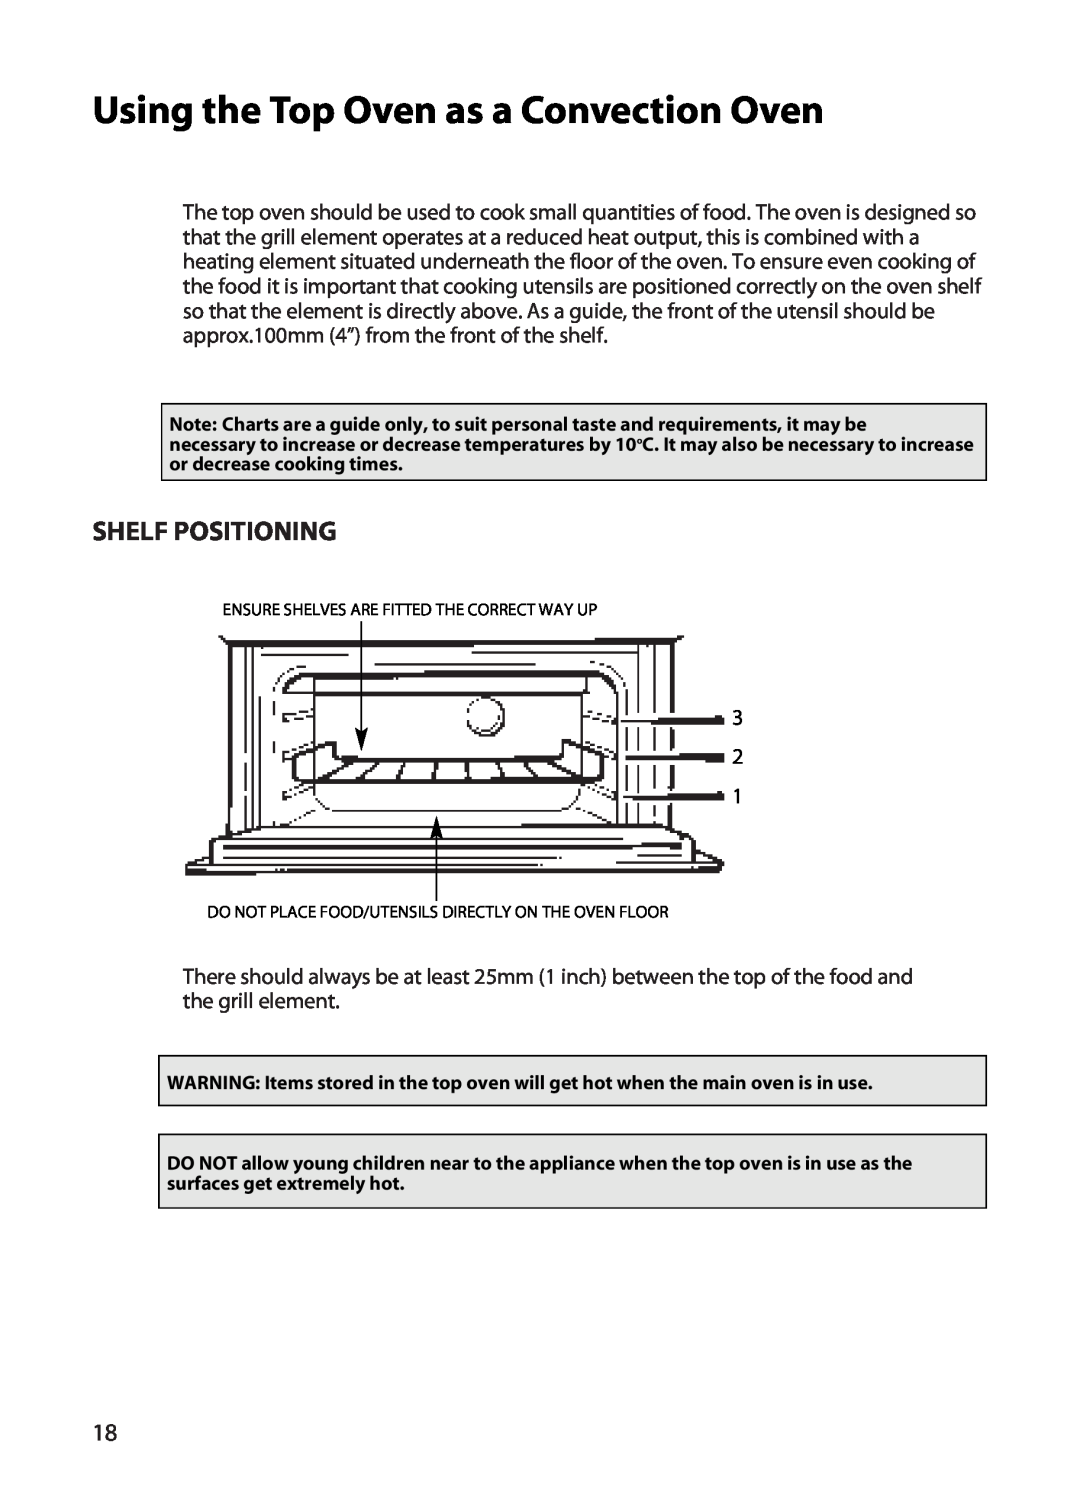 Hotpoint UT47, UD47 manual Using the Top Oven as a Convection Oven, Shelf Positioning 